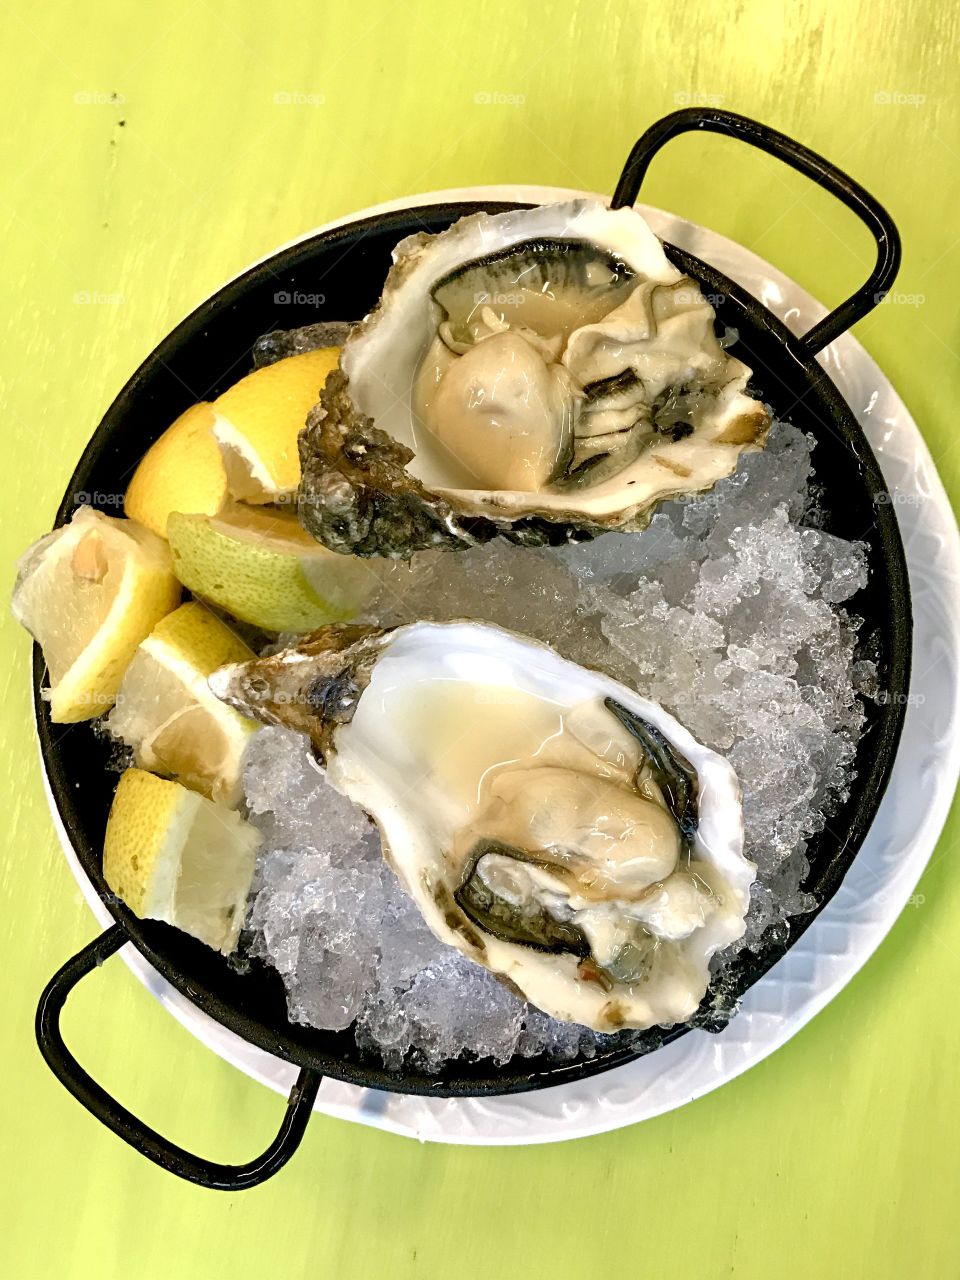 A luxury breakfast - oysters with lemon on ice